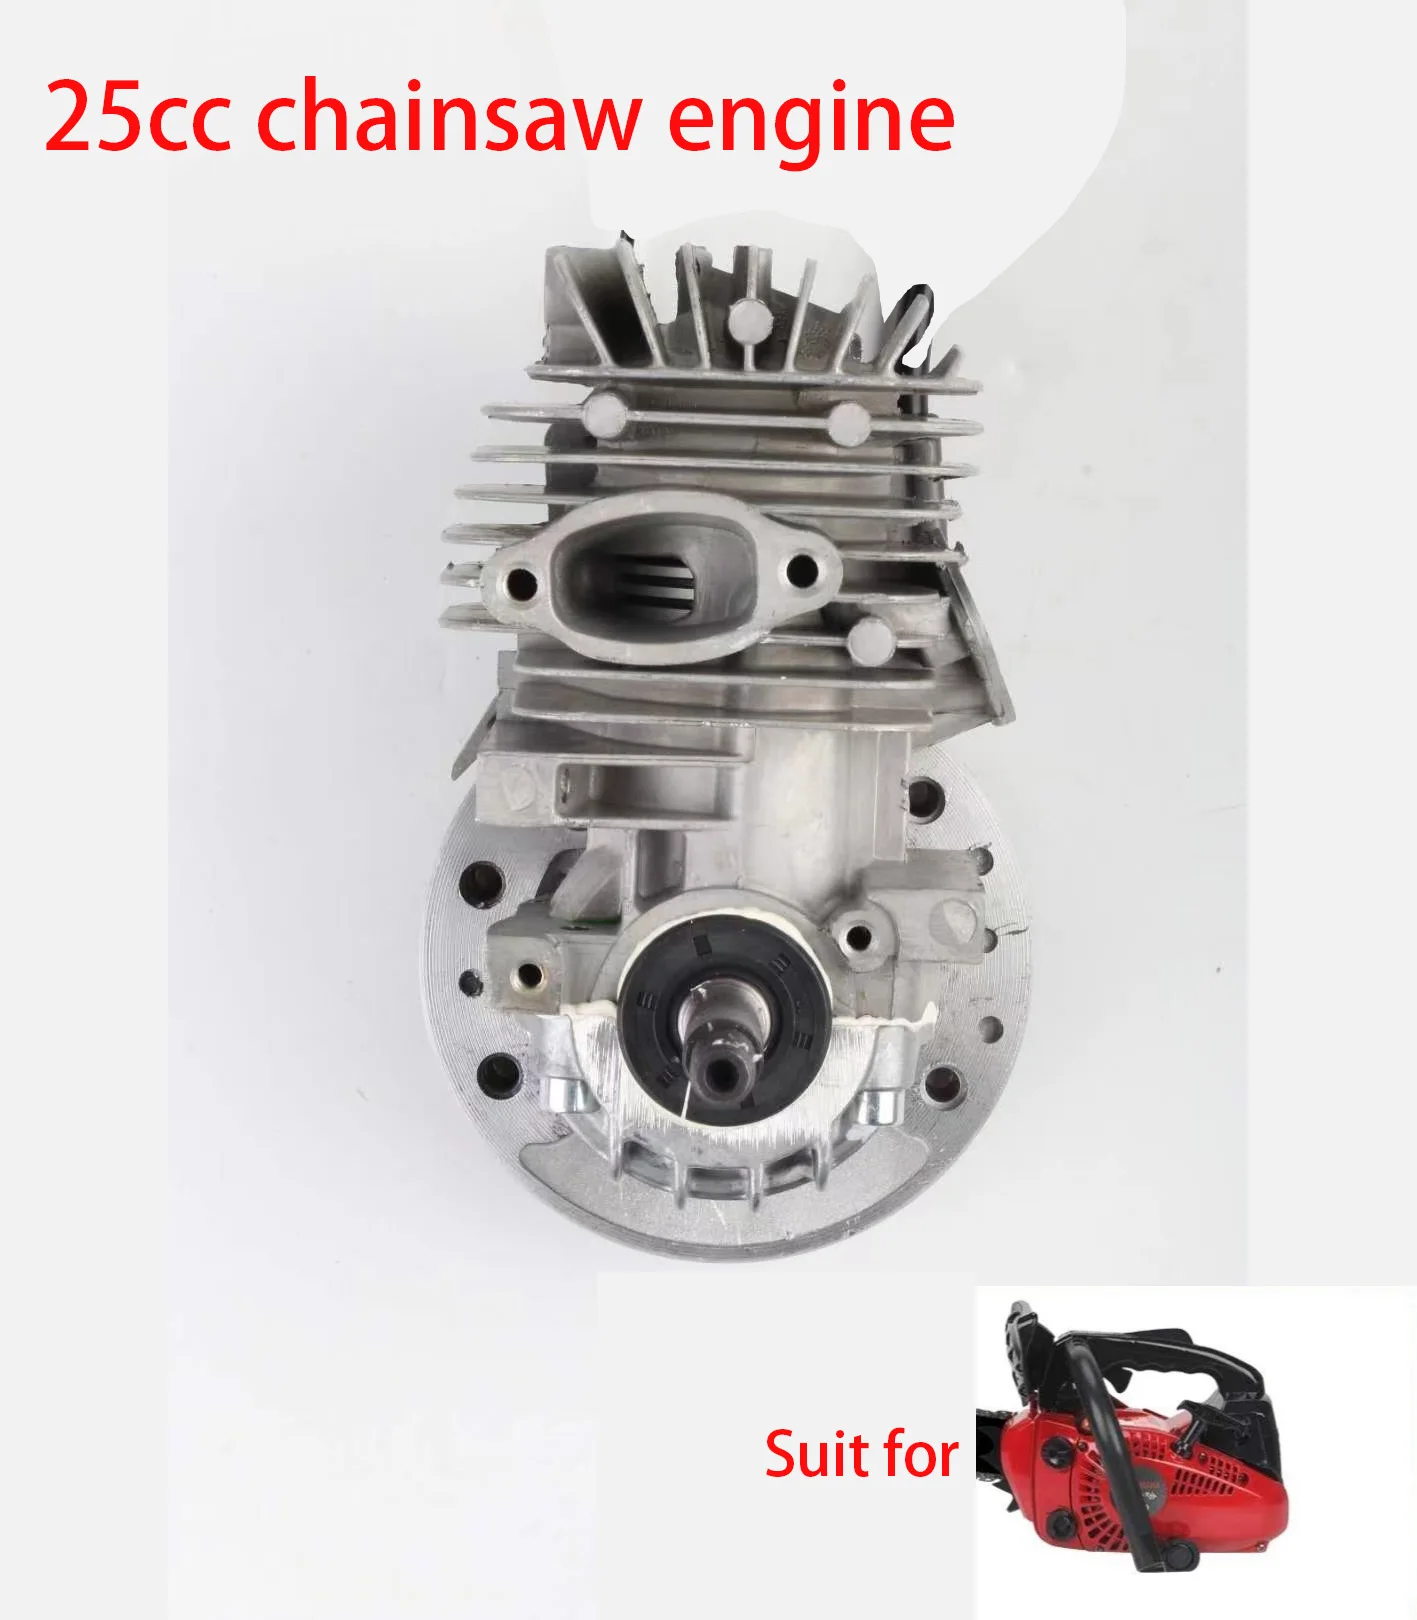 mc14a6 hlhic carburetor original 2500 25cc chainsaw zenoah g2500 universal fit more chinese stiga ama anova pruner top handle Whole Complete Engine Motor Cylinder Crankshaft Assembly For 25cc G2500 Top Handle Gasoline Chainsaw Pruner